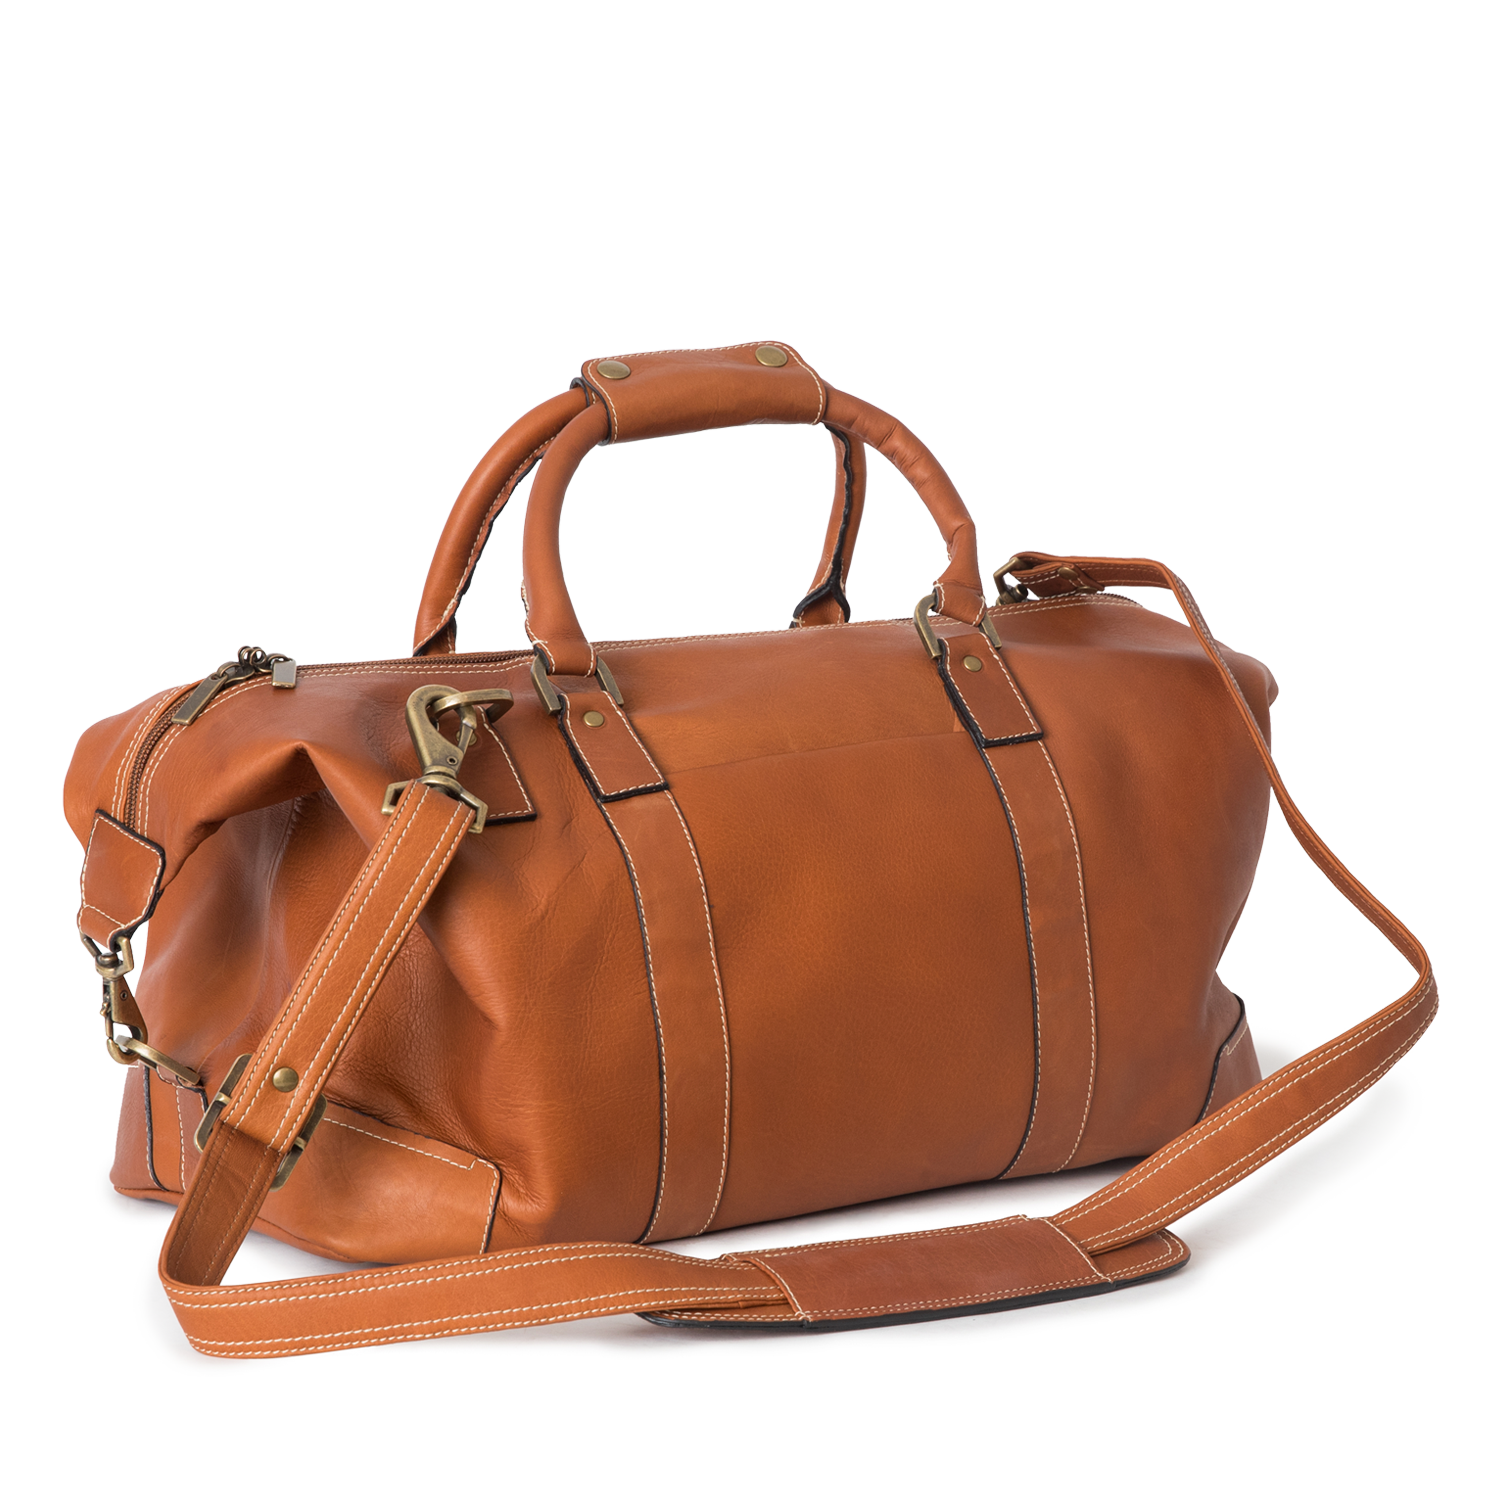 Highlander Leather Duffel - Links and Kings